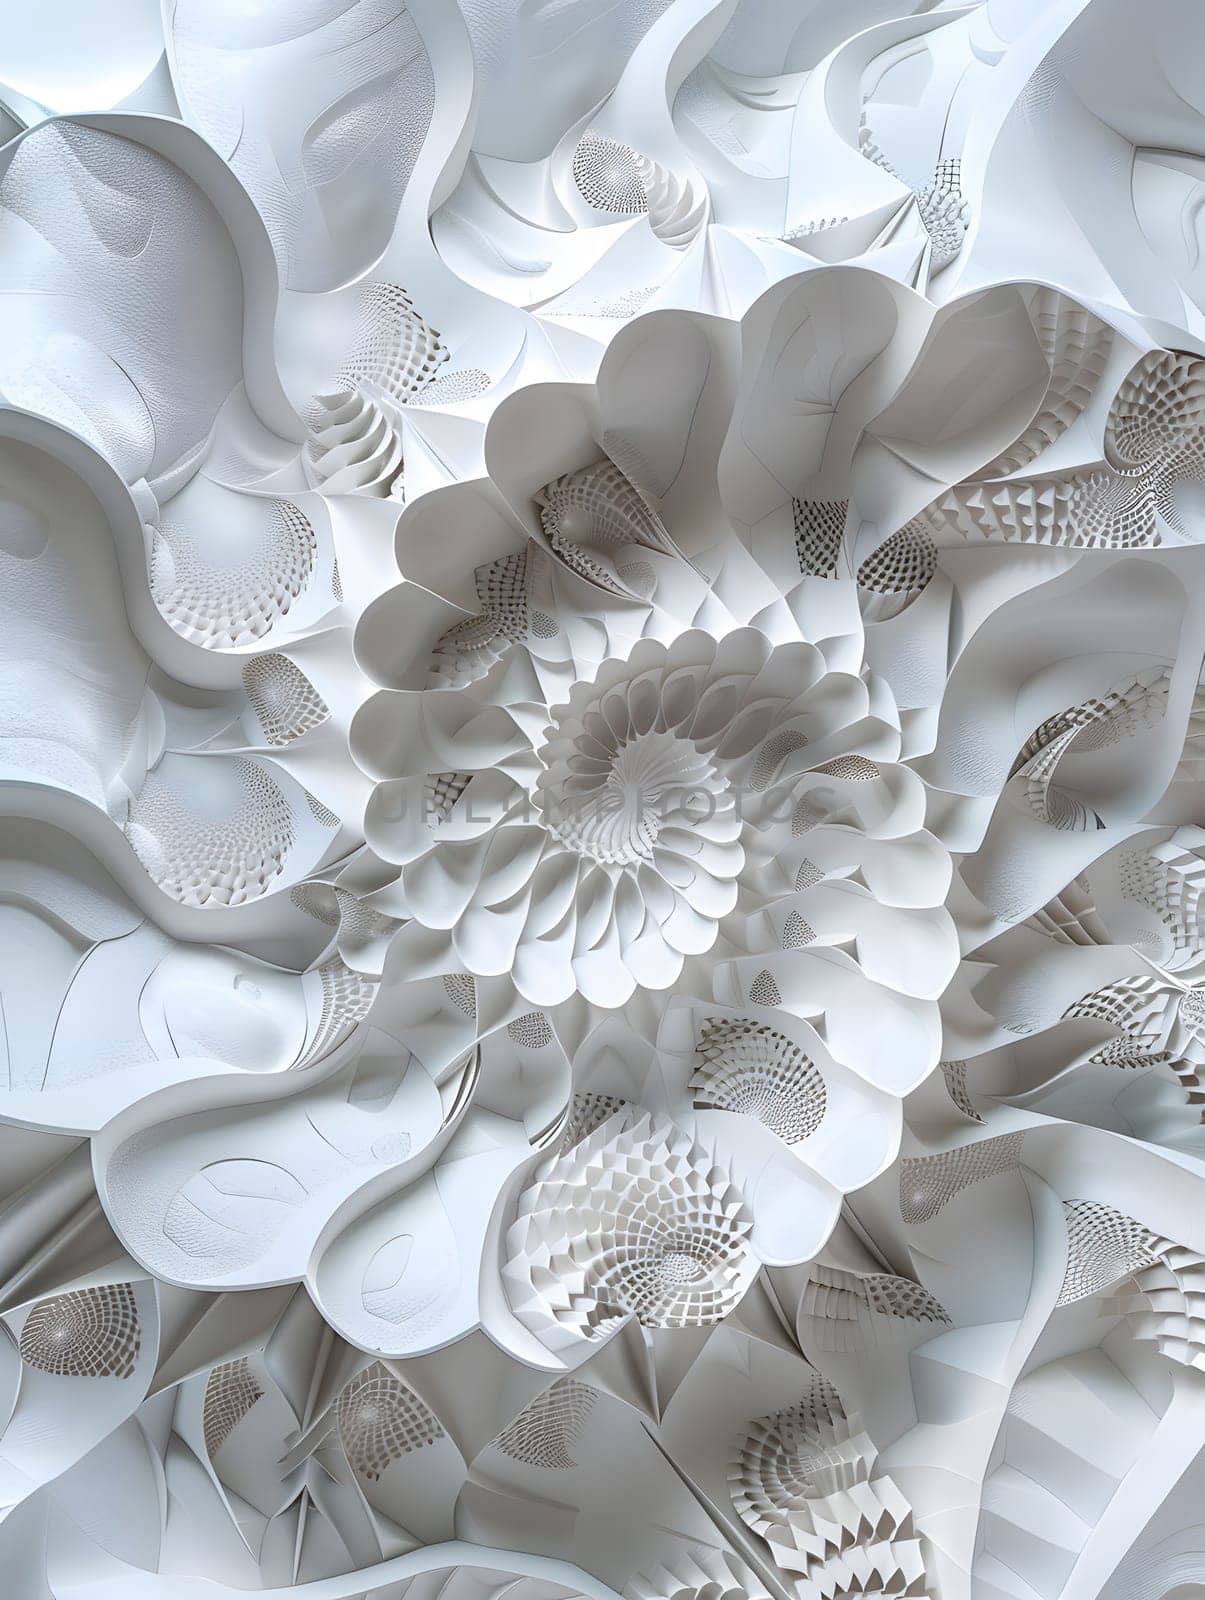 A closeup shot of a white flower sculpture featuring intricate petal patterns. This art piece would make a stunning motif for linens or a fashion accessory